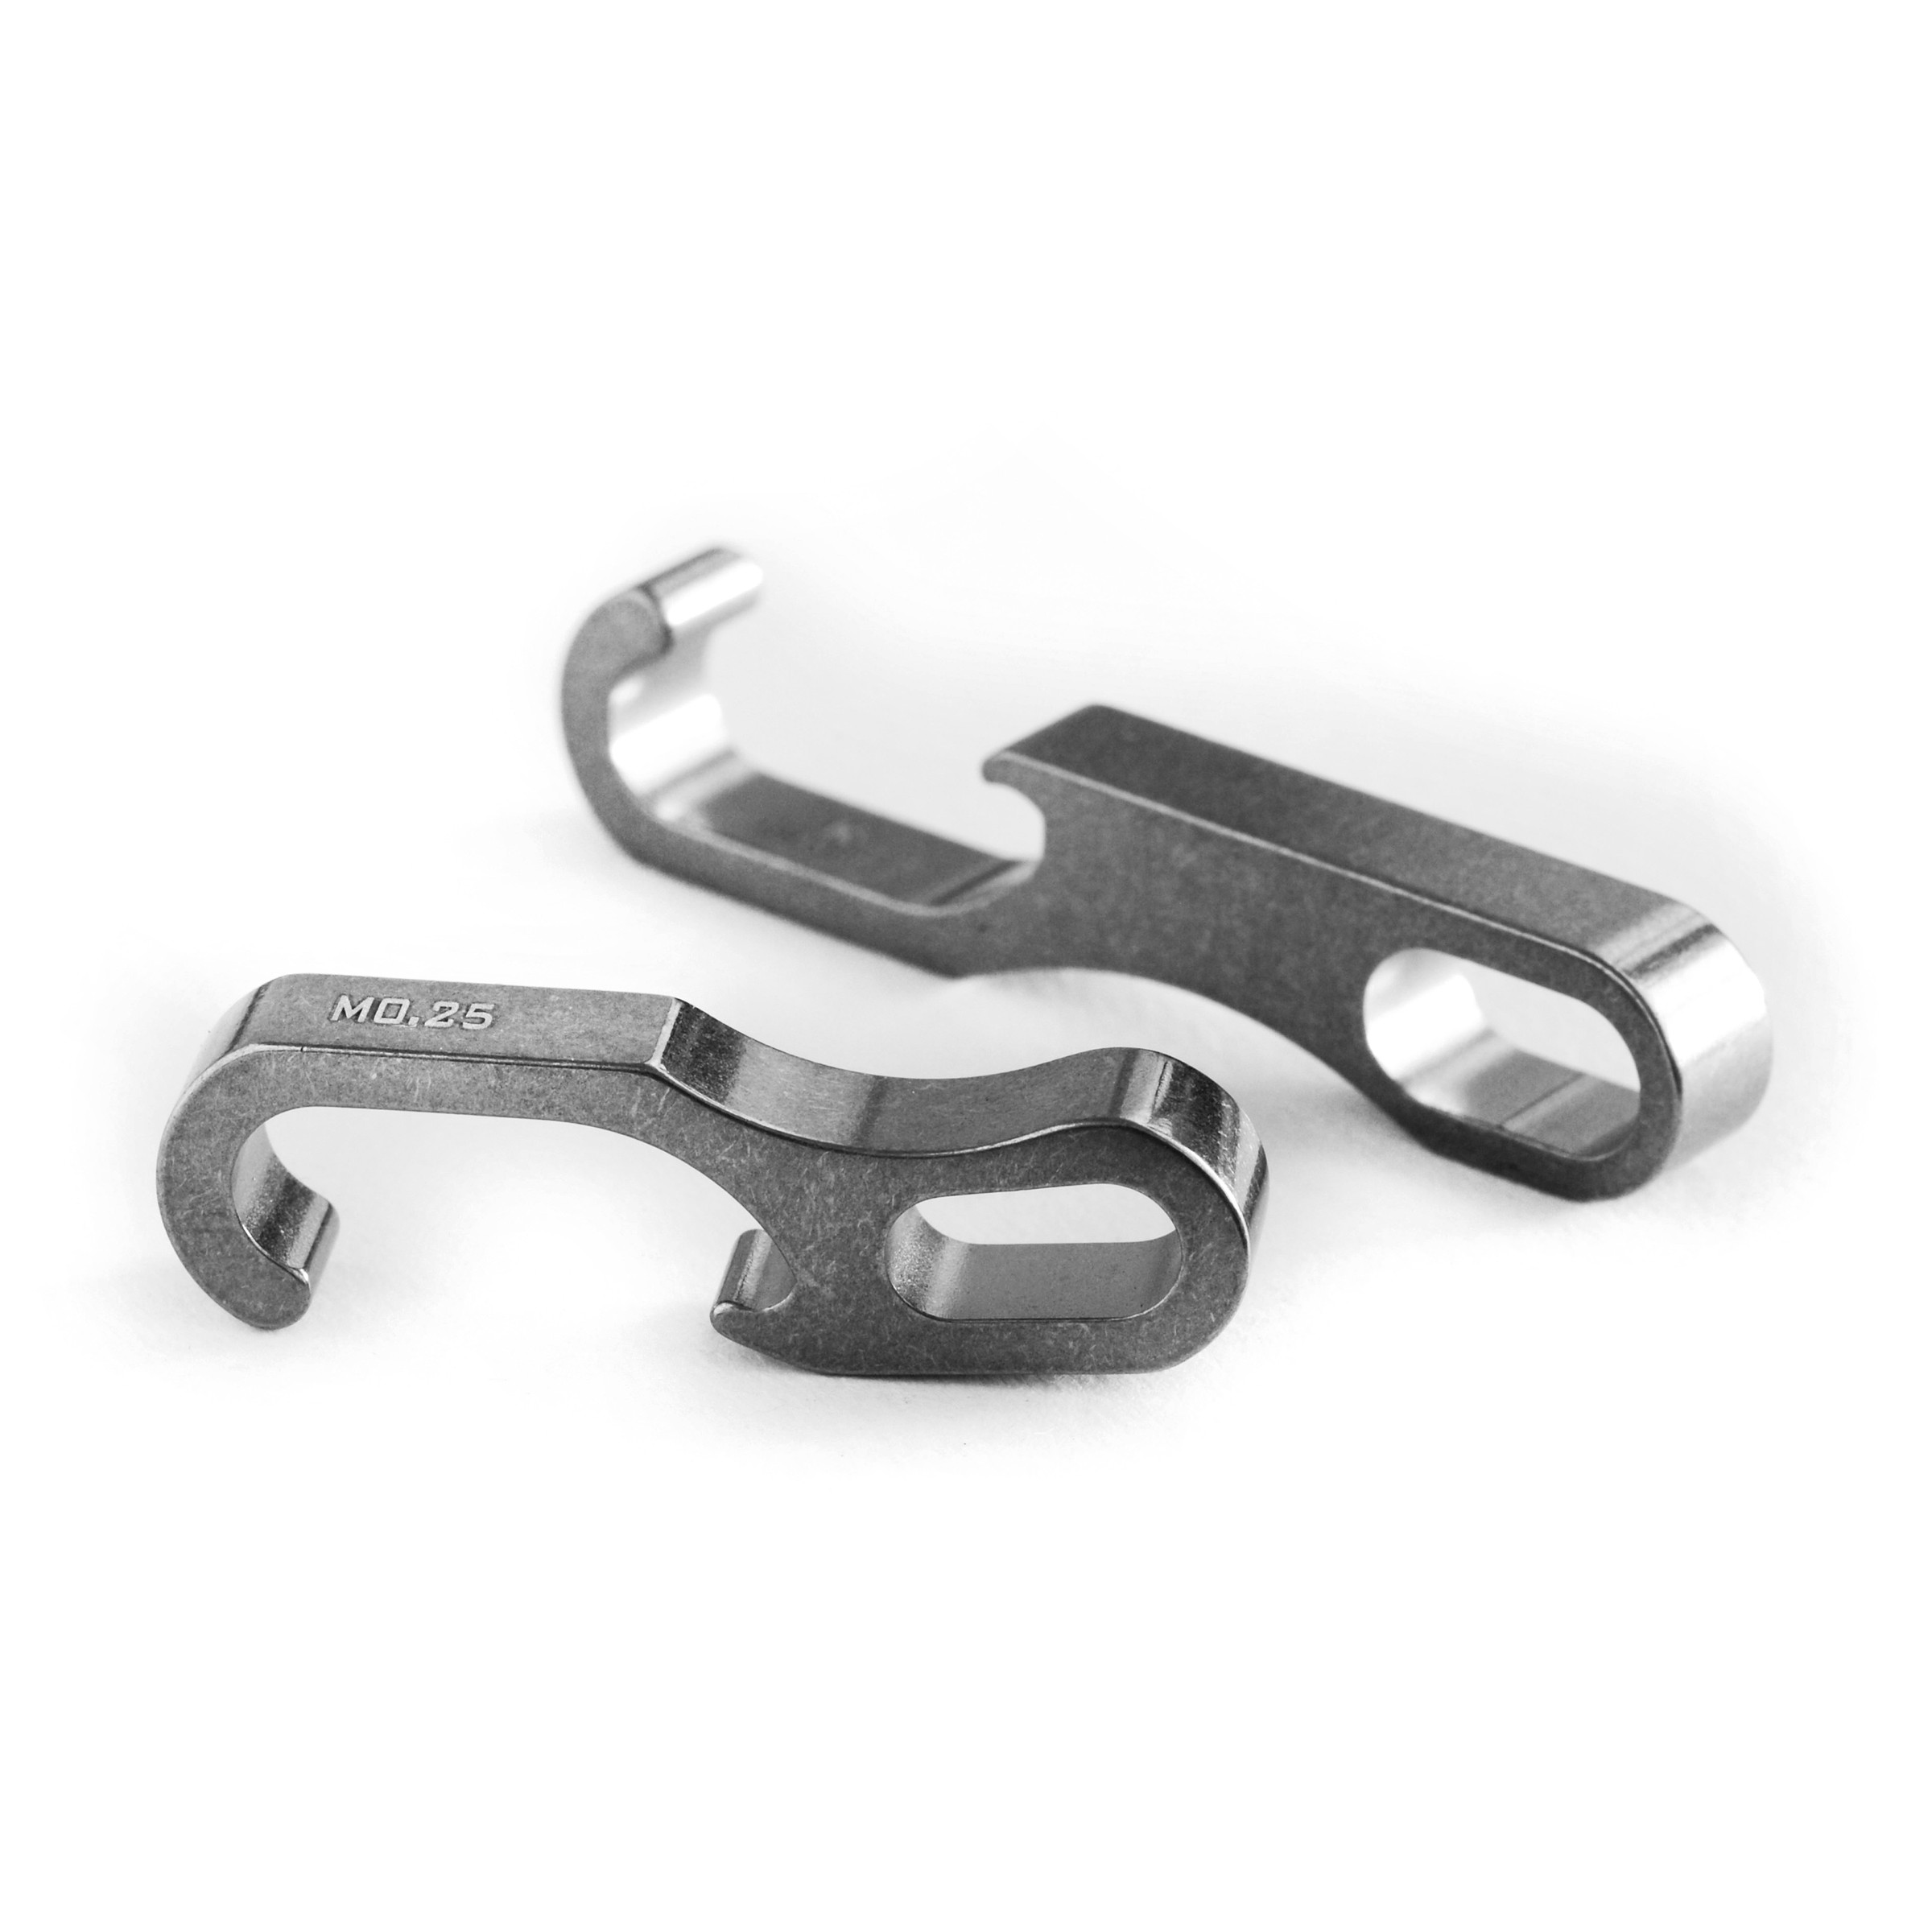 Details about   1 Pcs Titanium alloy mini bottle opener can opener stainless steel key clasp.BE 